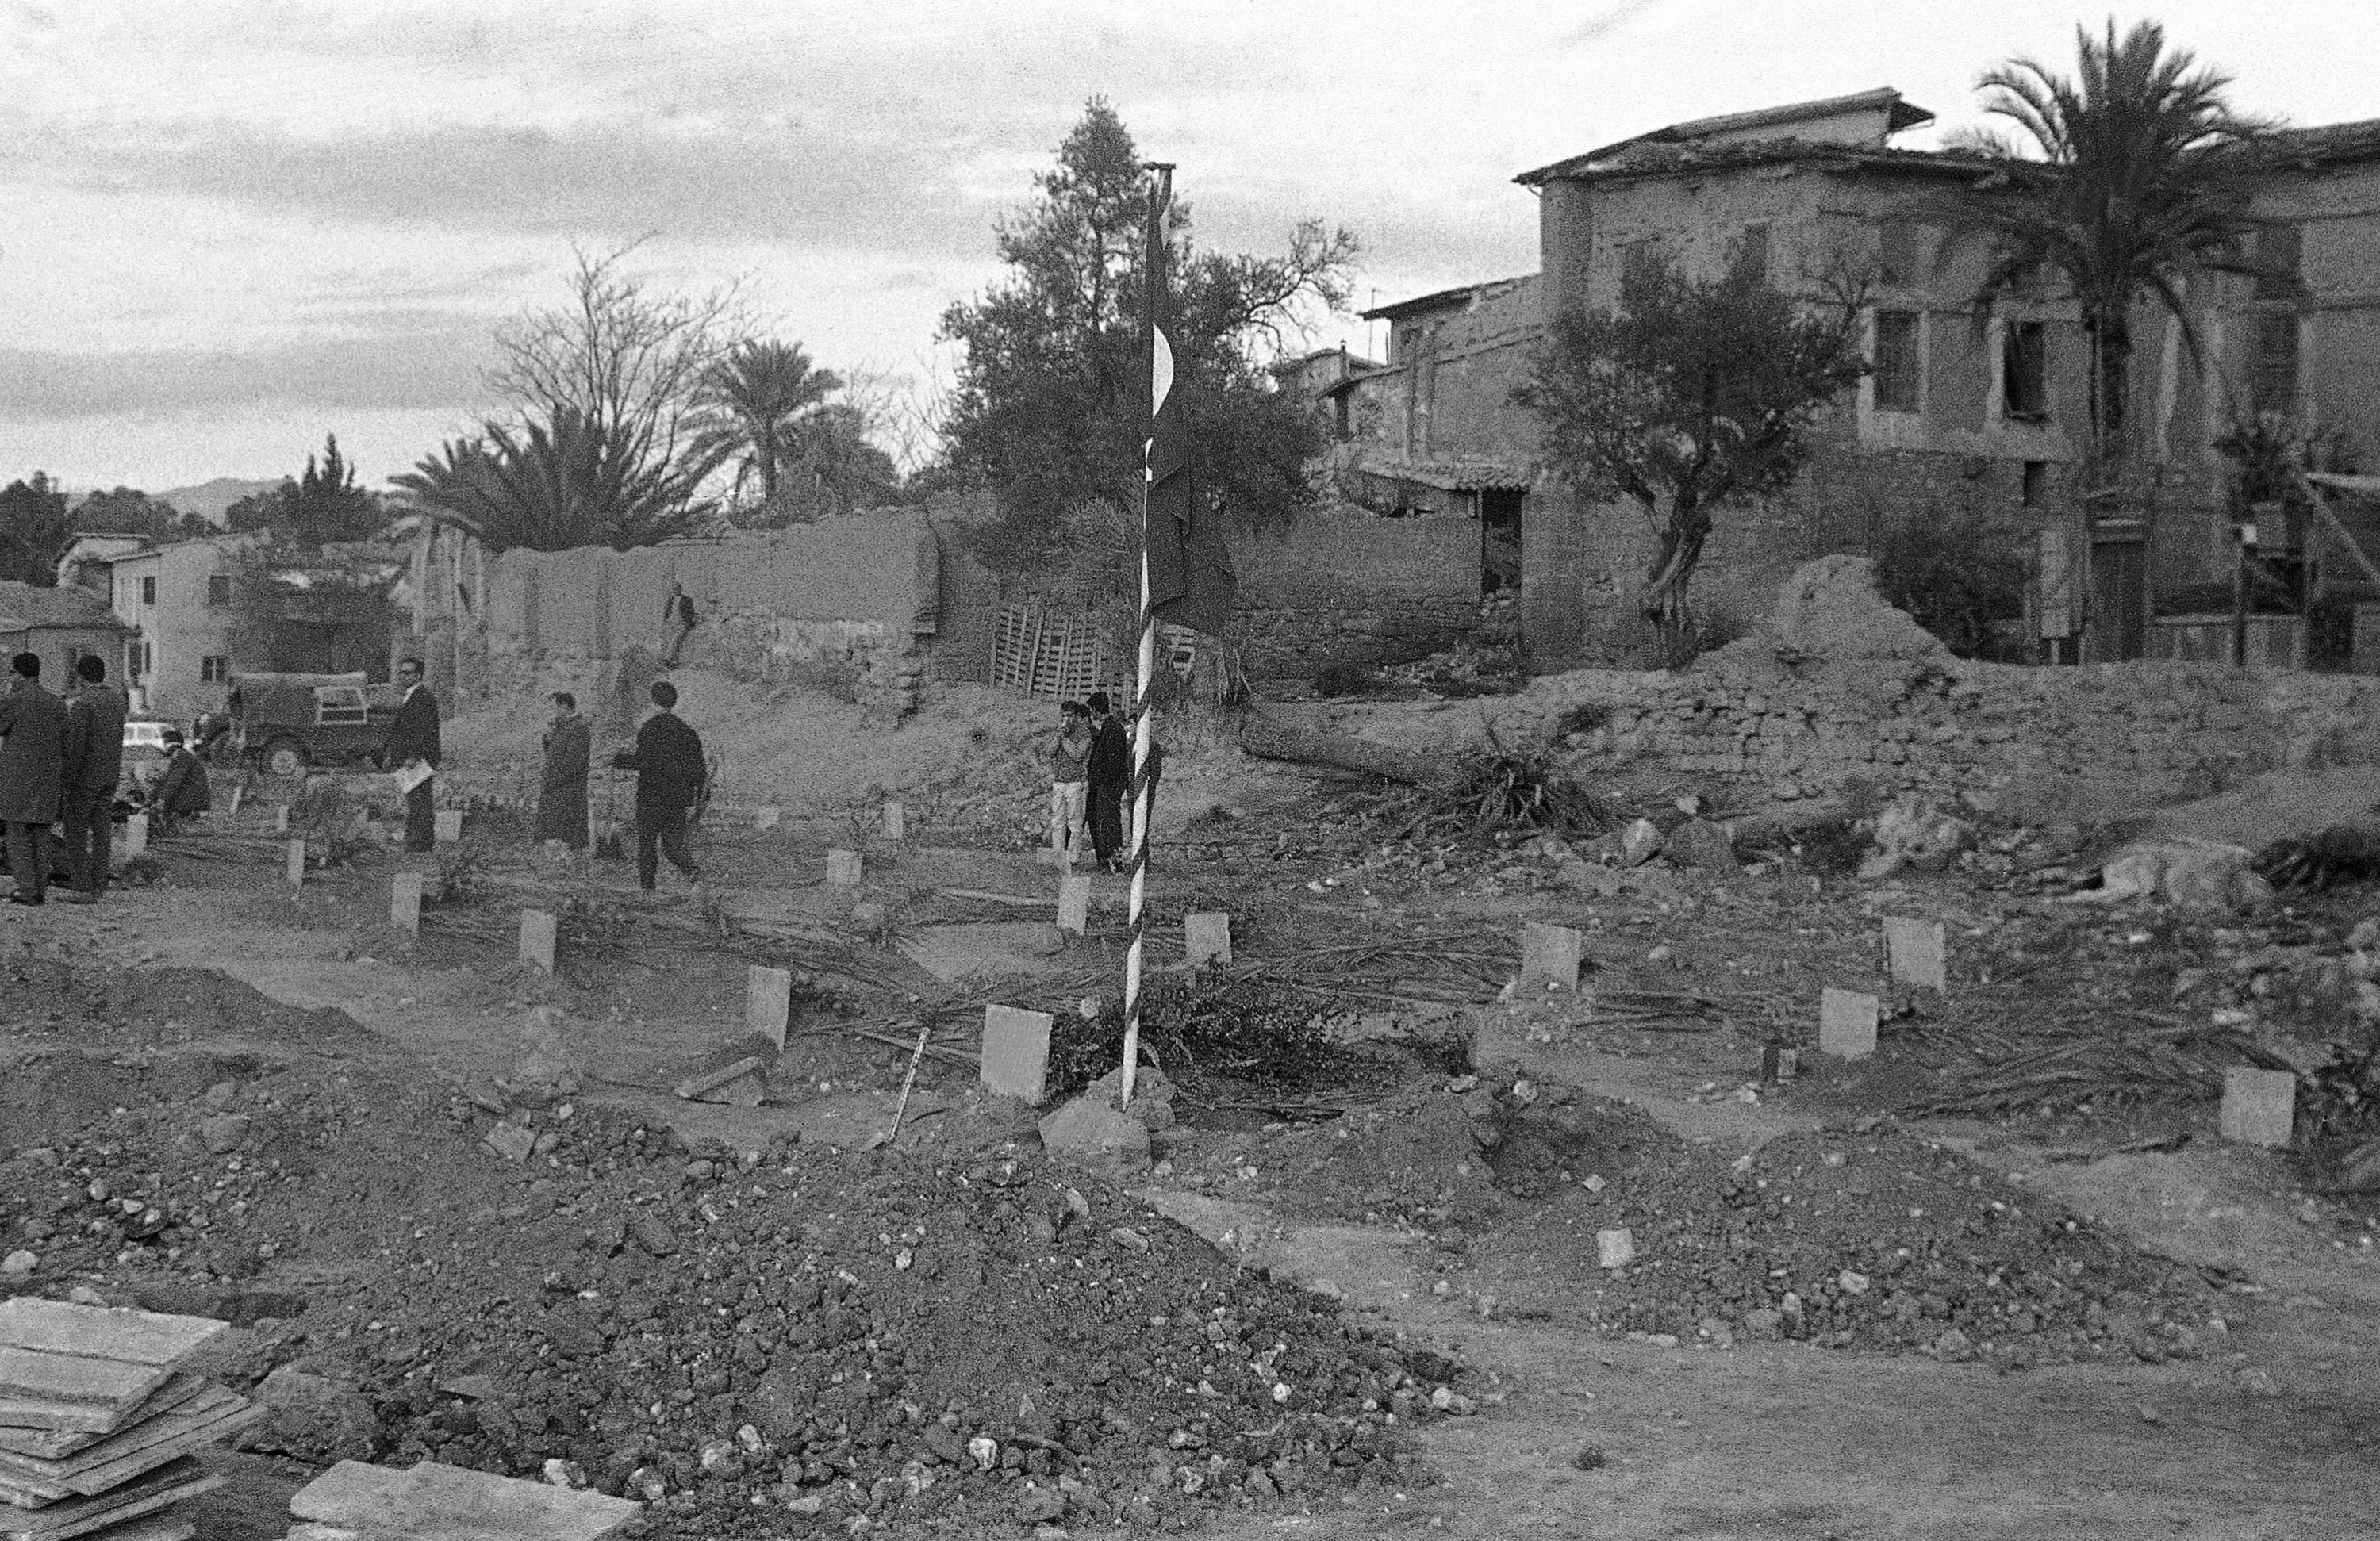 In Turkish Sector, temporary cemetery buried two bodies more which found in Kucuk Kaymakli area on Jan. 7, 1964 in Cyprus and brought here by English Red Cross. Bodies belong to Hodja Huseyin Igneci, 70 and his son Hasan, 16. (AP Photo)